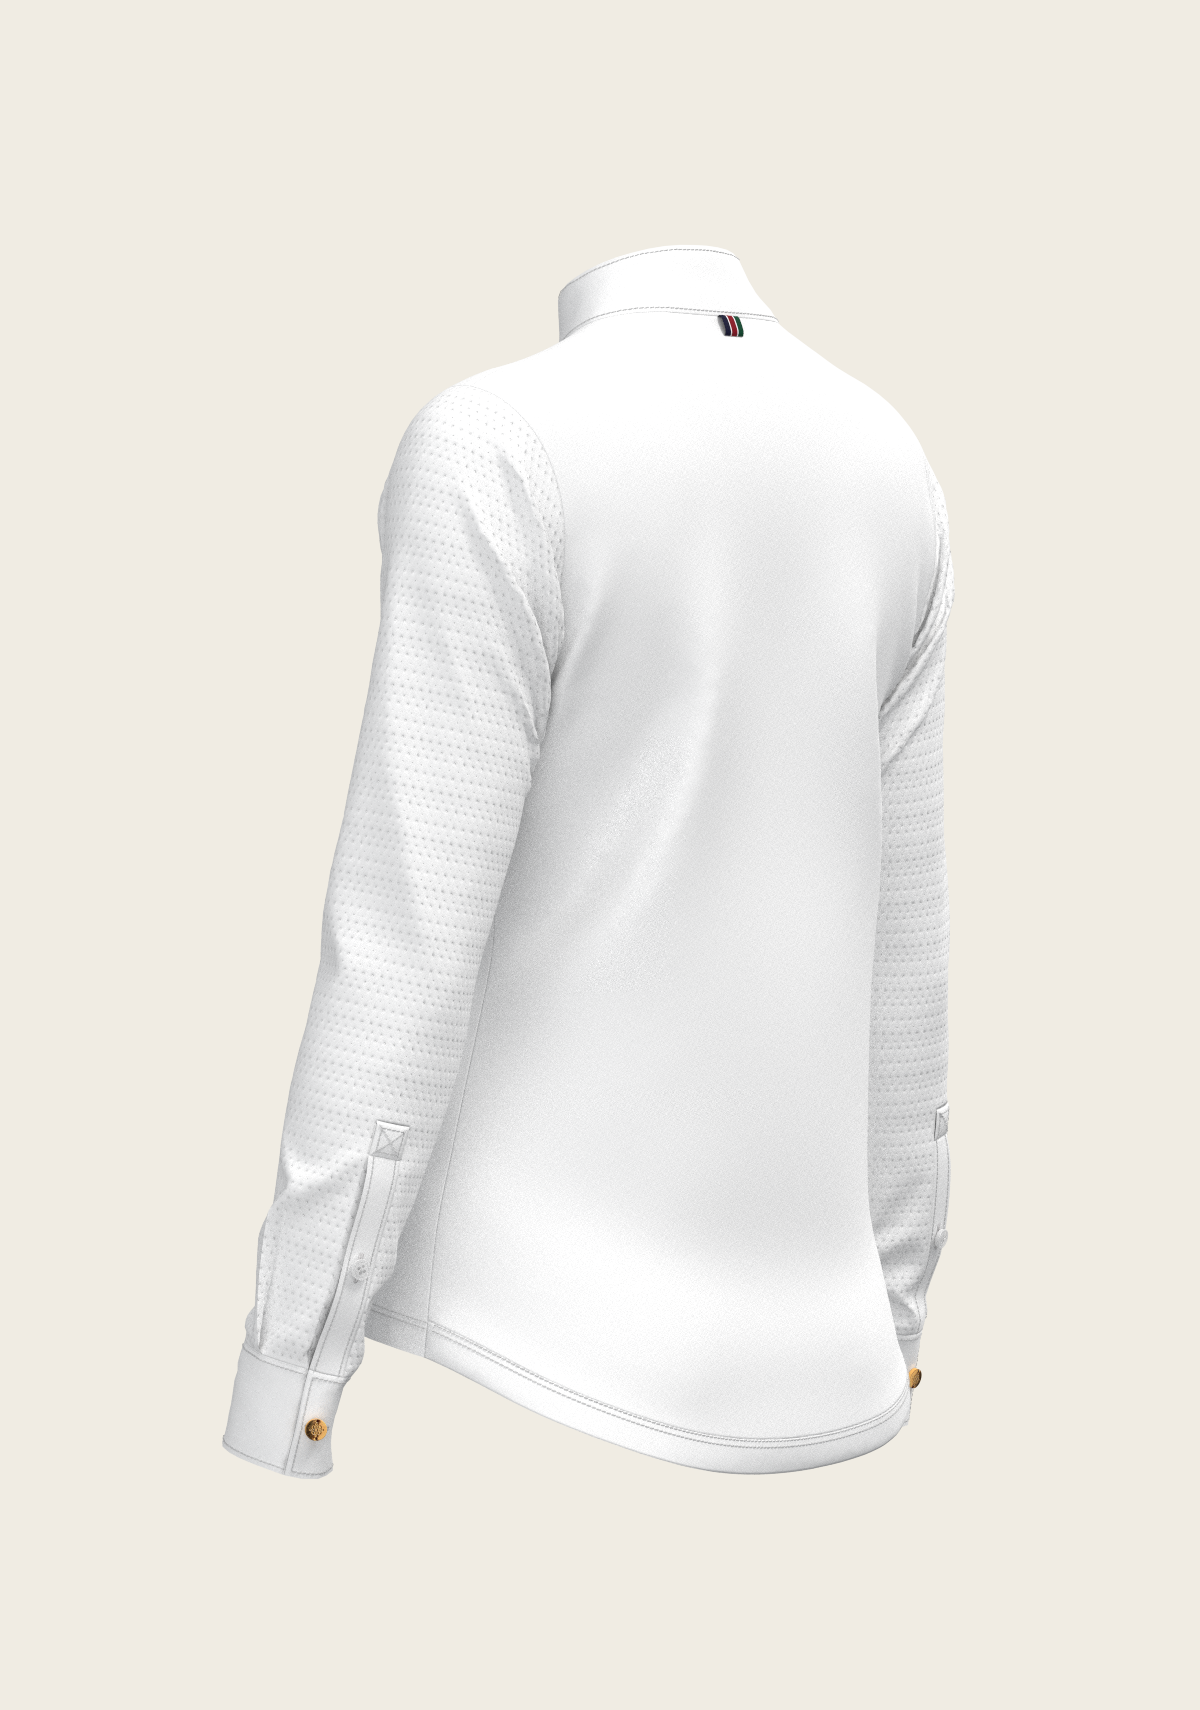  White with Forest on Navy Inner Details Long Sleeve Show Shirt